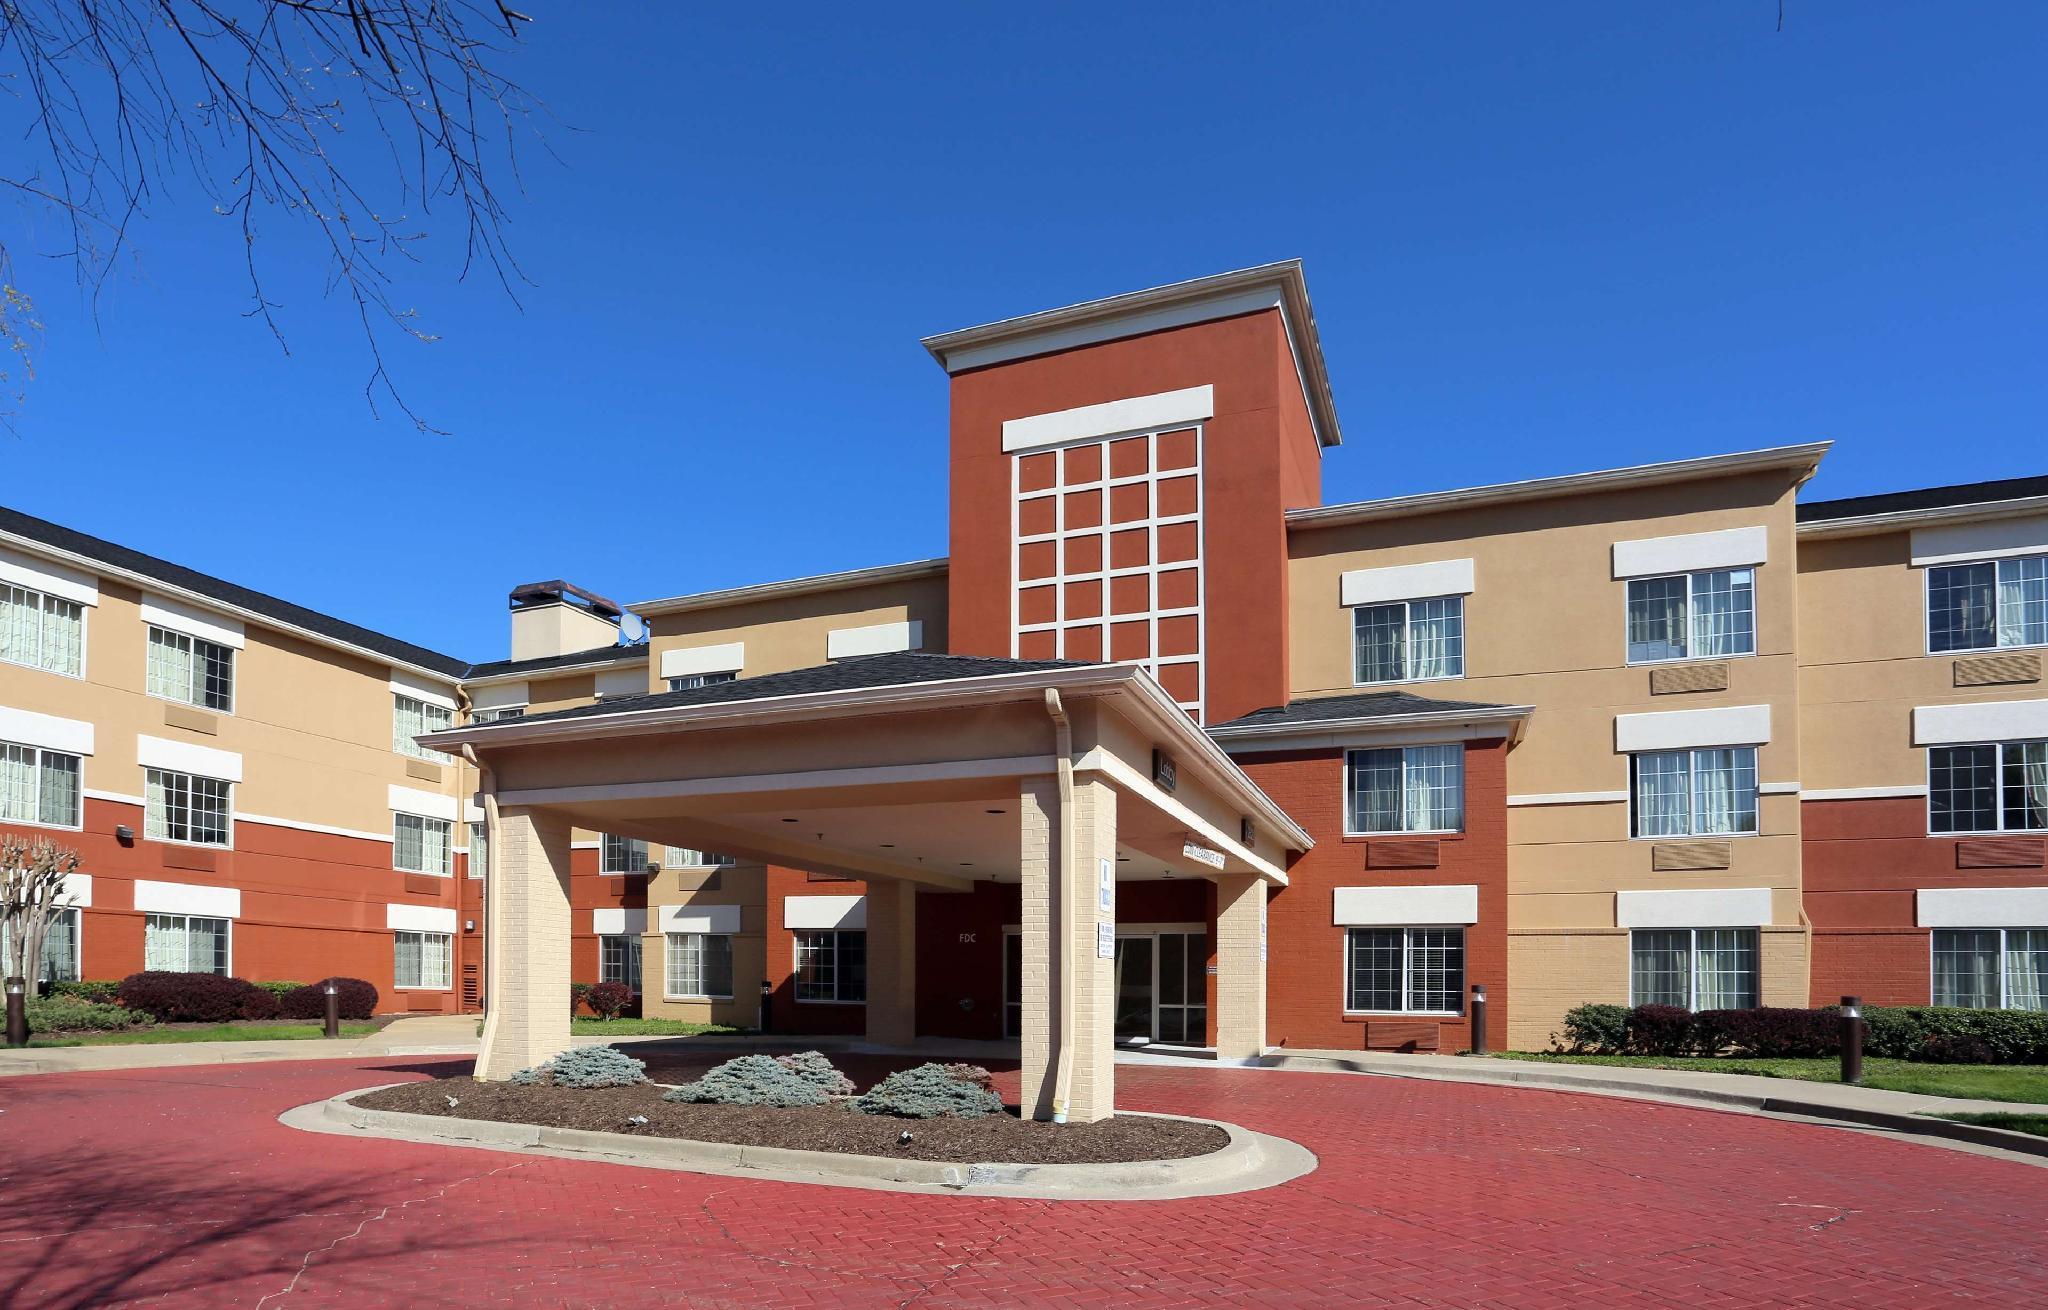 Extended Stay America Suites - Washington, D.c. - Rockville - Gaithersburg, MD